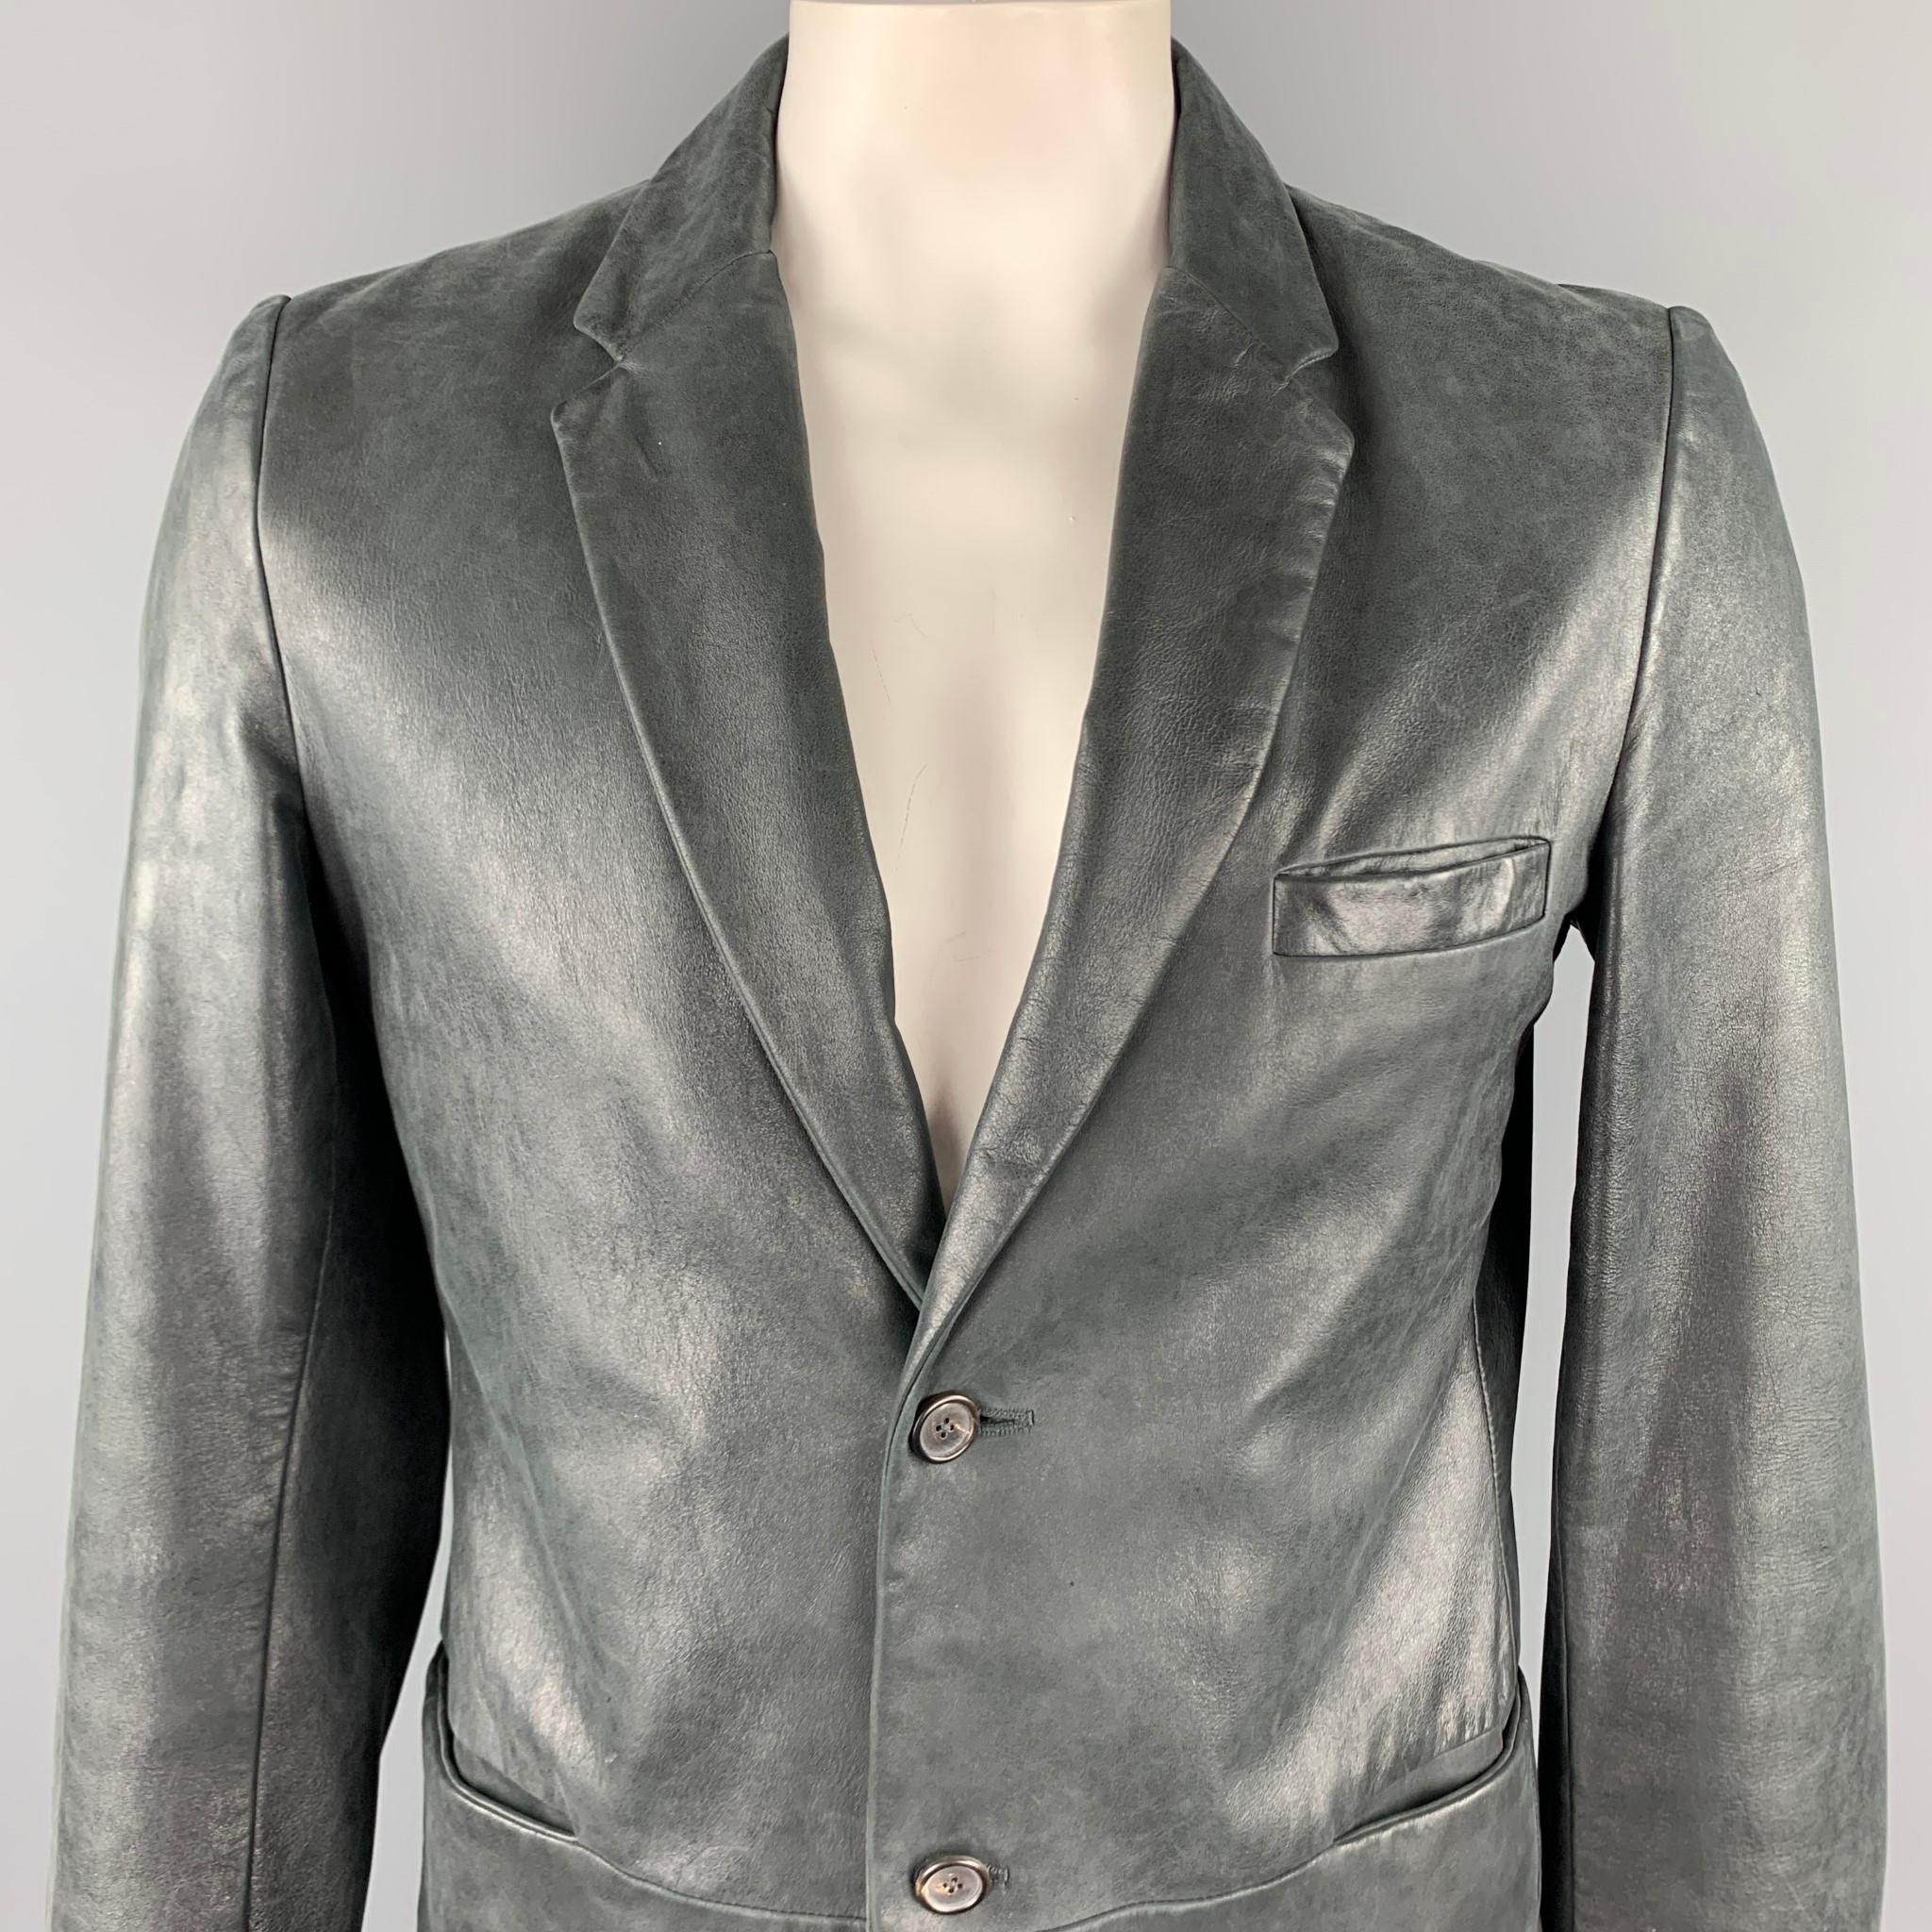 JIL SANDER jacket comes in a charcoal distressed leather featuring a notch lapel, slit pockets, and a two button closure. Made in Italy.

Very Good Pre-Owned Condition.
Marked: IT 54

Measurements:

Shoulder: 18.5 in.
Chest: 42 in. 
Sleeve: 28.5 in.